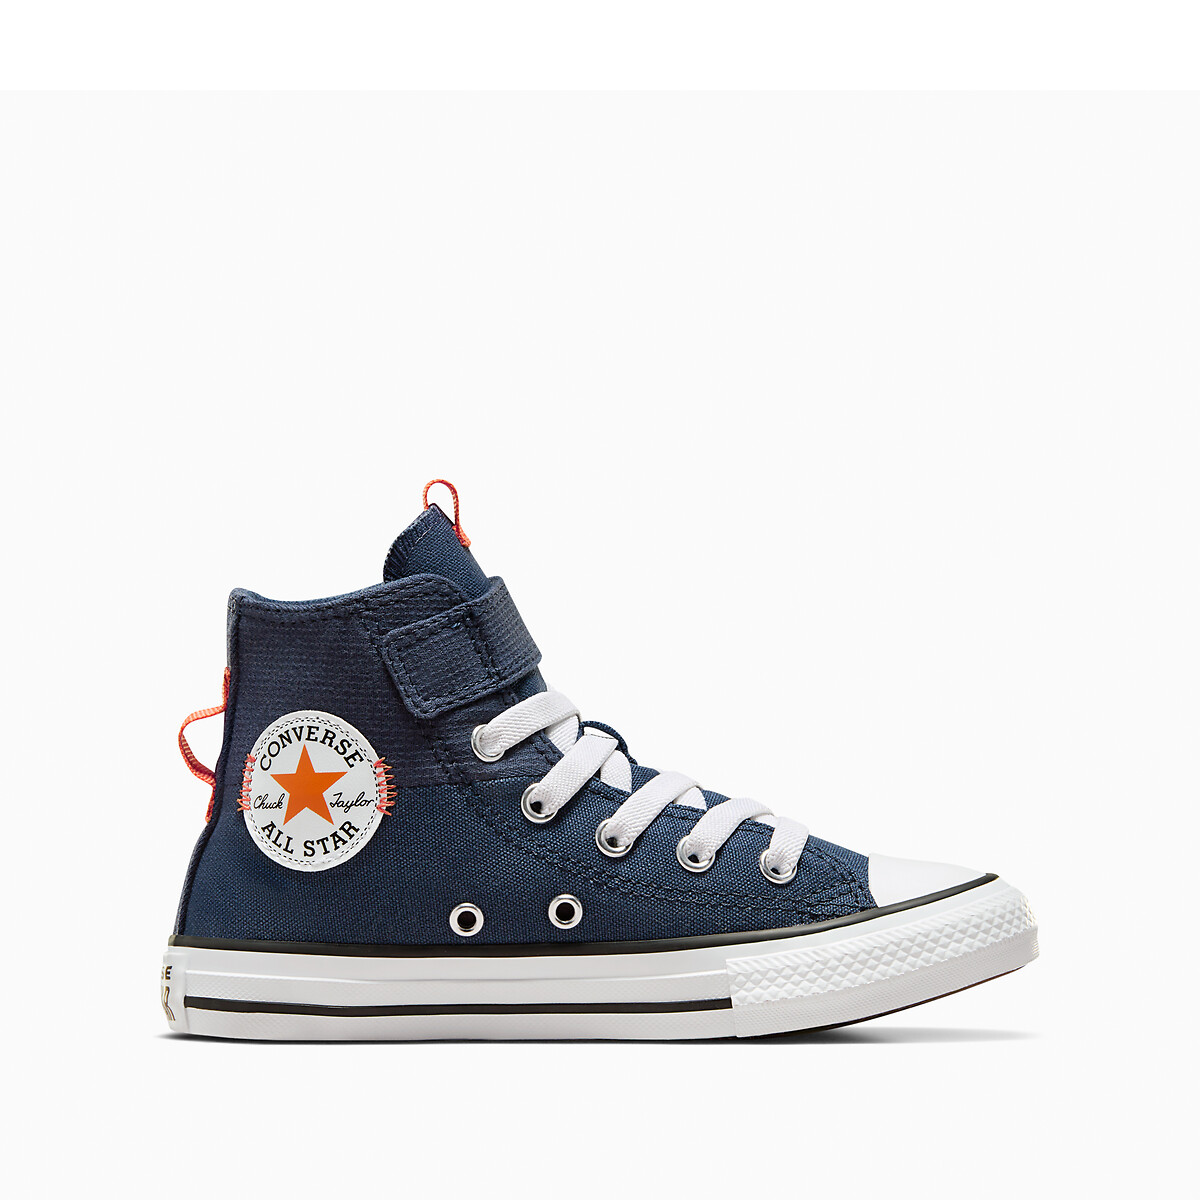 Converse Sneakers All Star 1V Hi Day Trip Utility